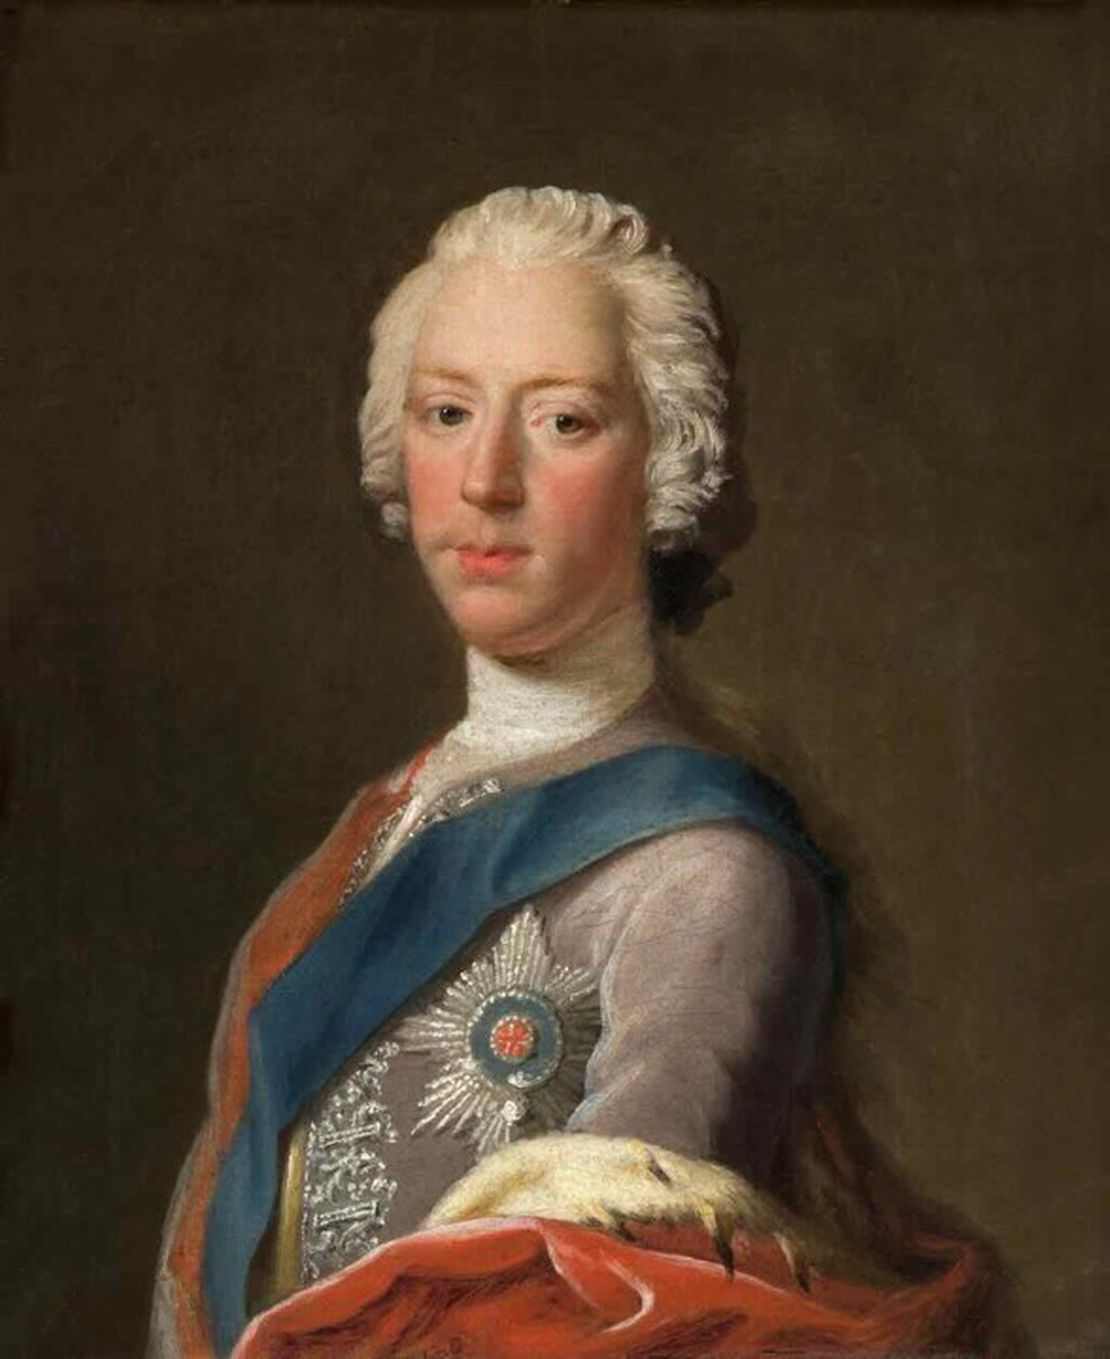 Charles Stuart invades England at the head of the Jacobite Army